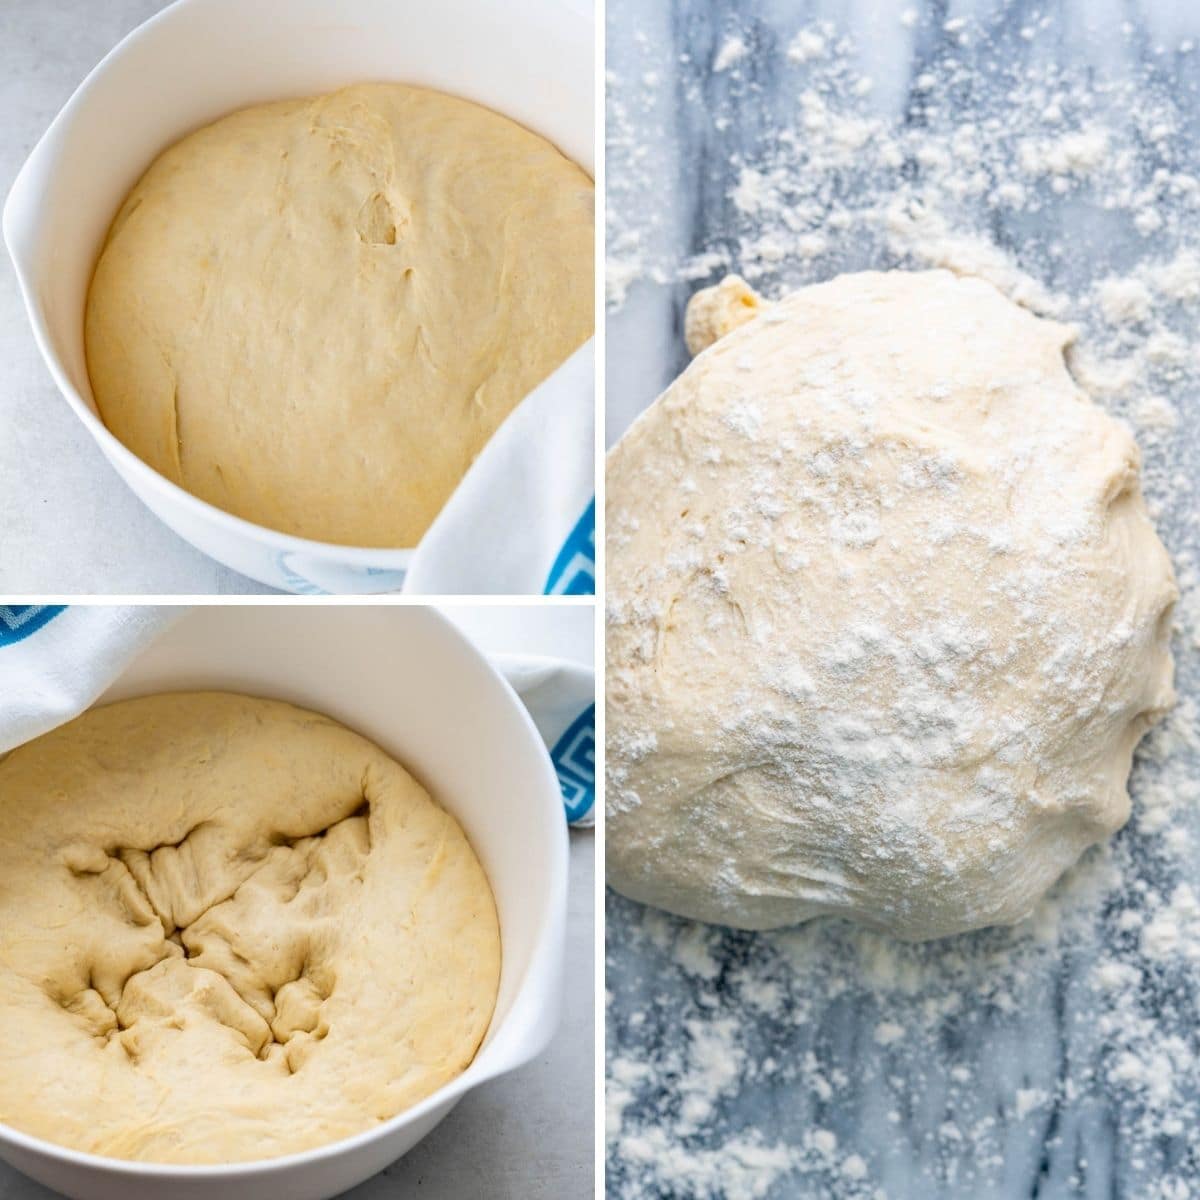 Letting the yeast roll dough rise before punching it down.